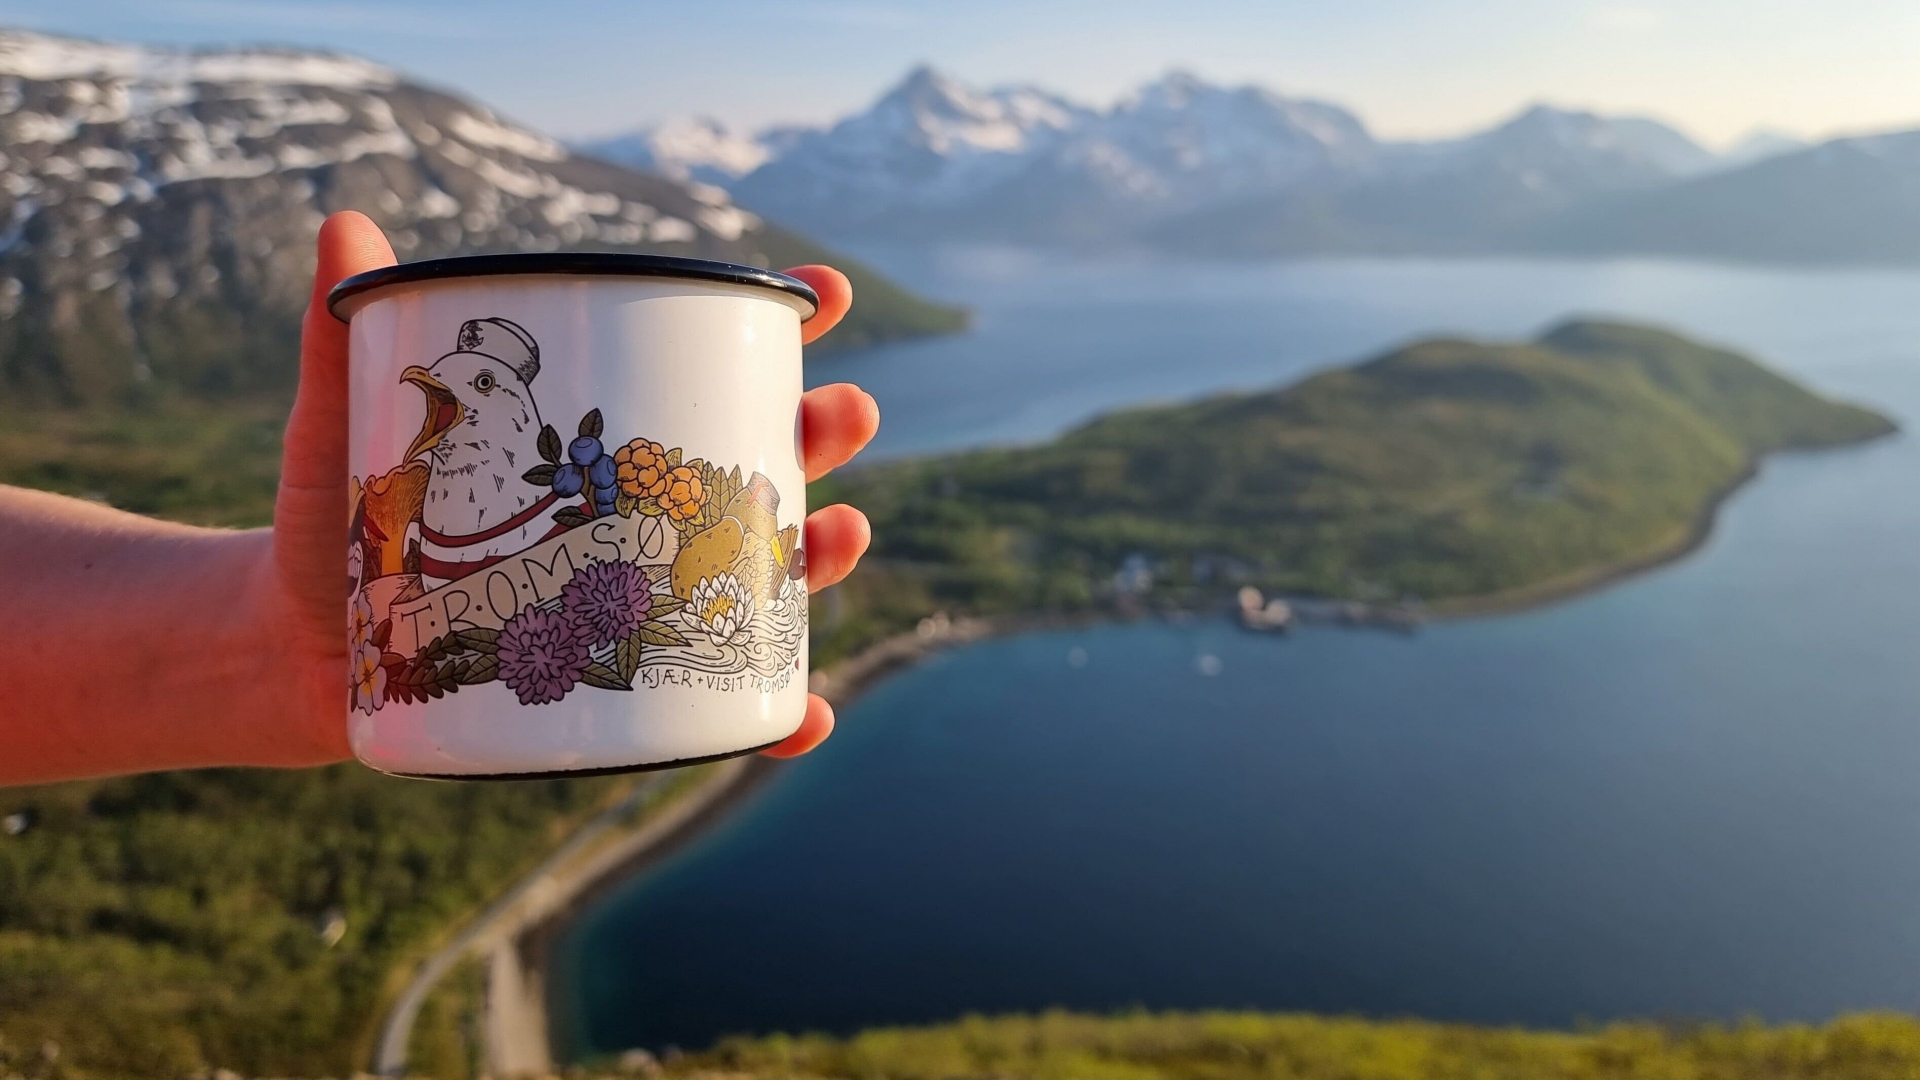 Enamel cup on a mountain top